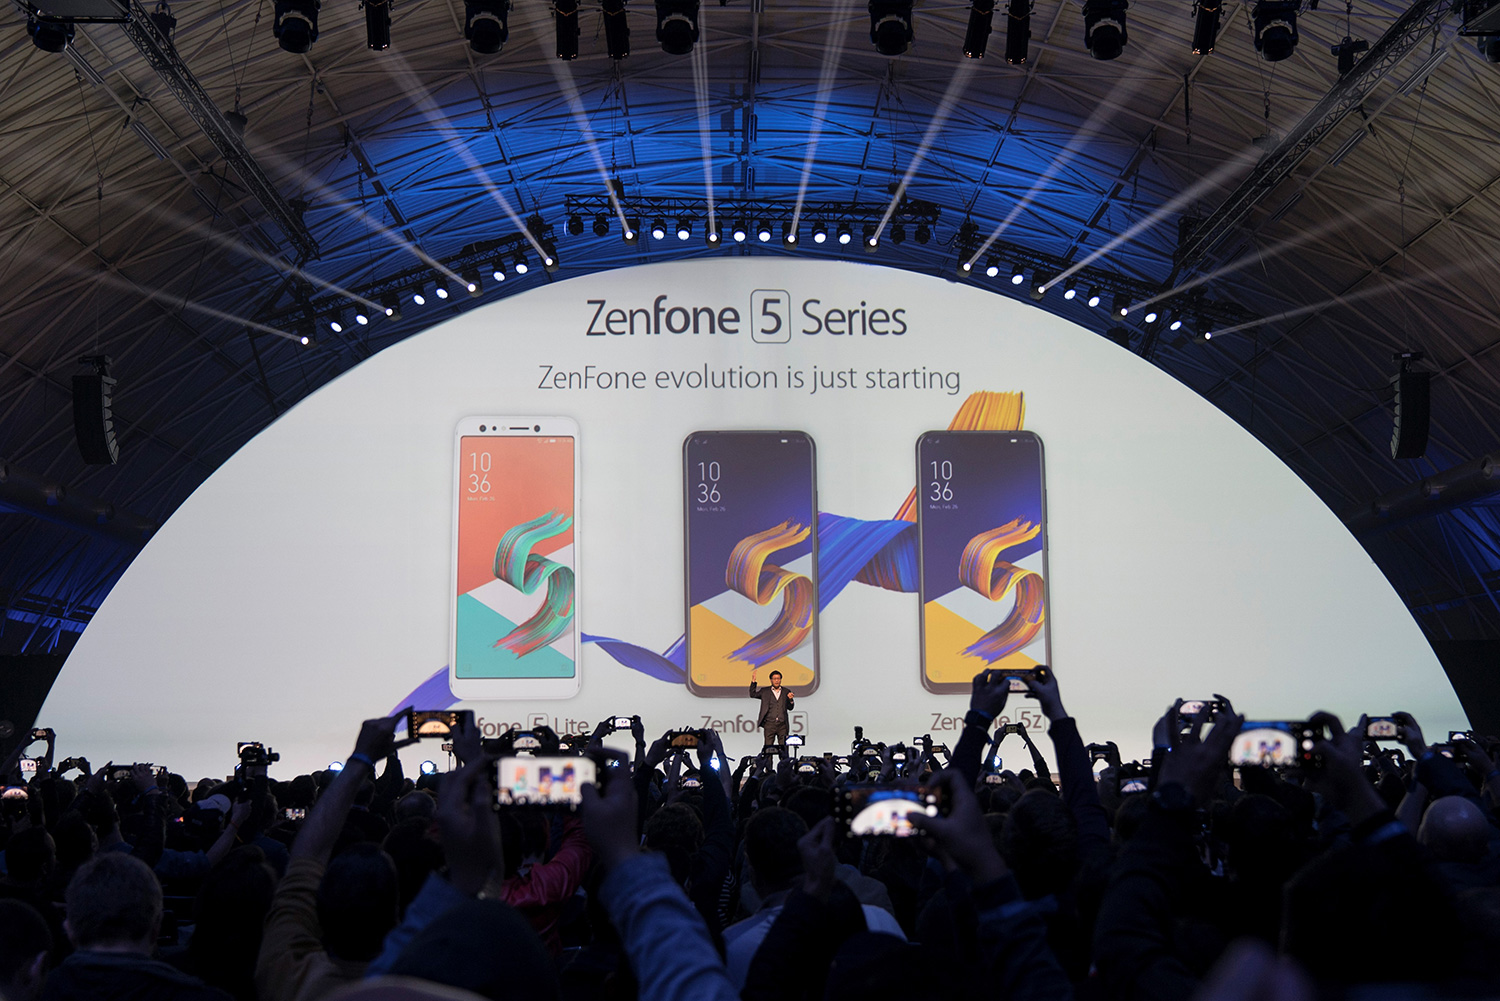 MWC 2018: ASUS ZenFone 5 Series Goes Official